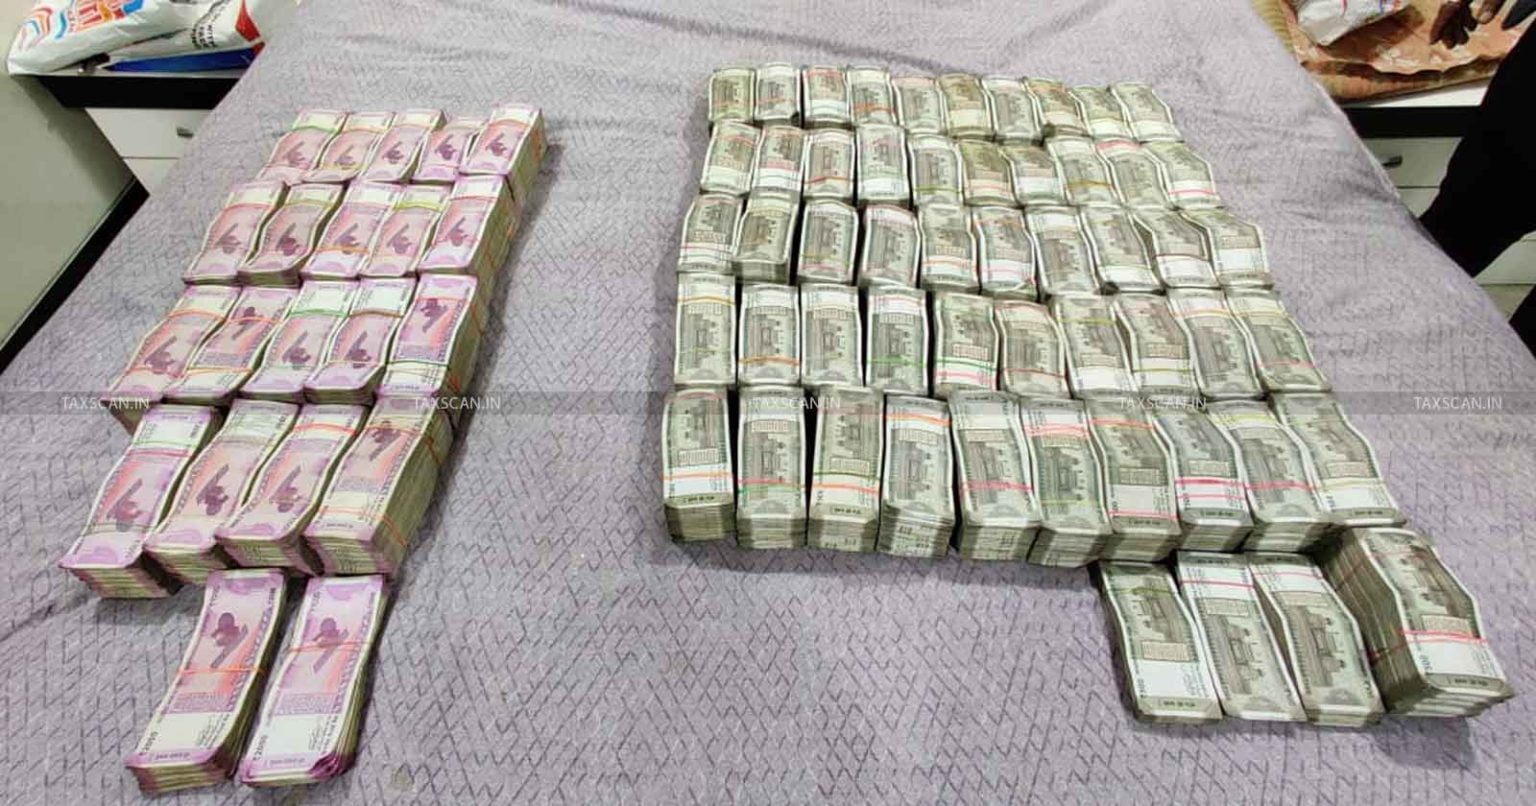 Rs. 50 Lakhs Cash Seized on Search u/s132 of Income Tax: Delhi HC ...